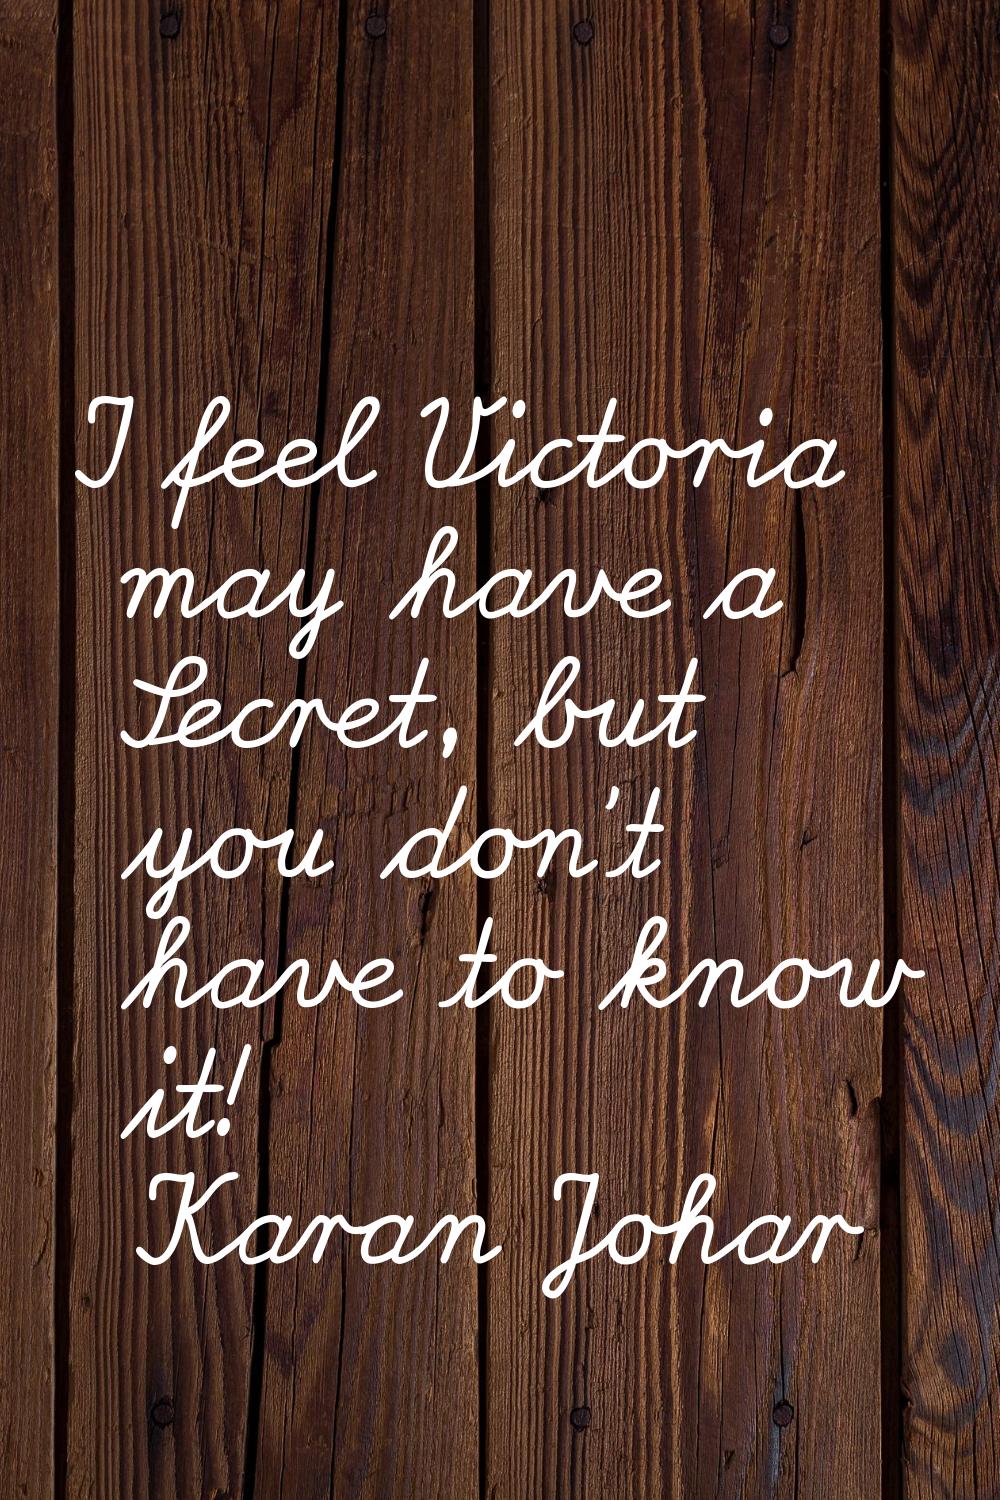 I feel Victoria may have a Secret, but you don't have to know it!